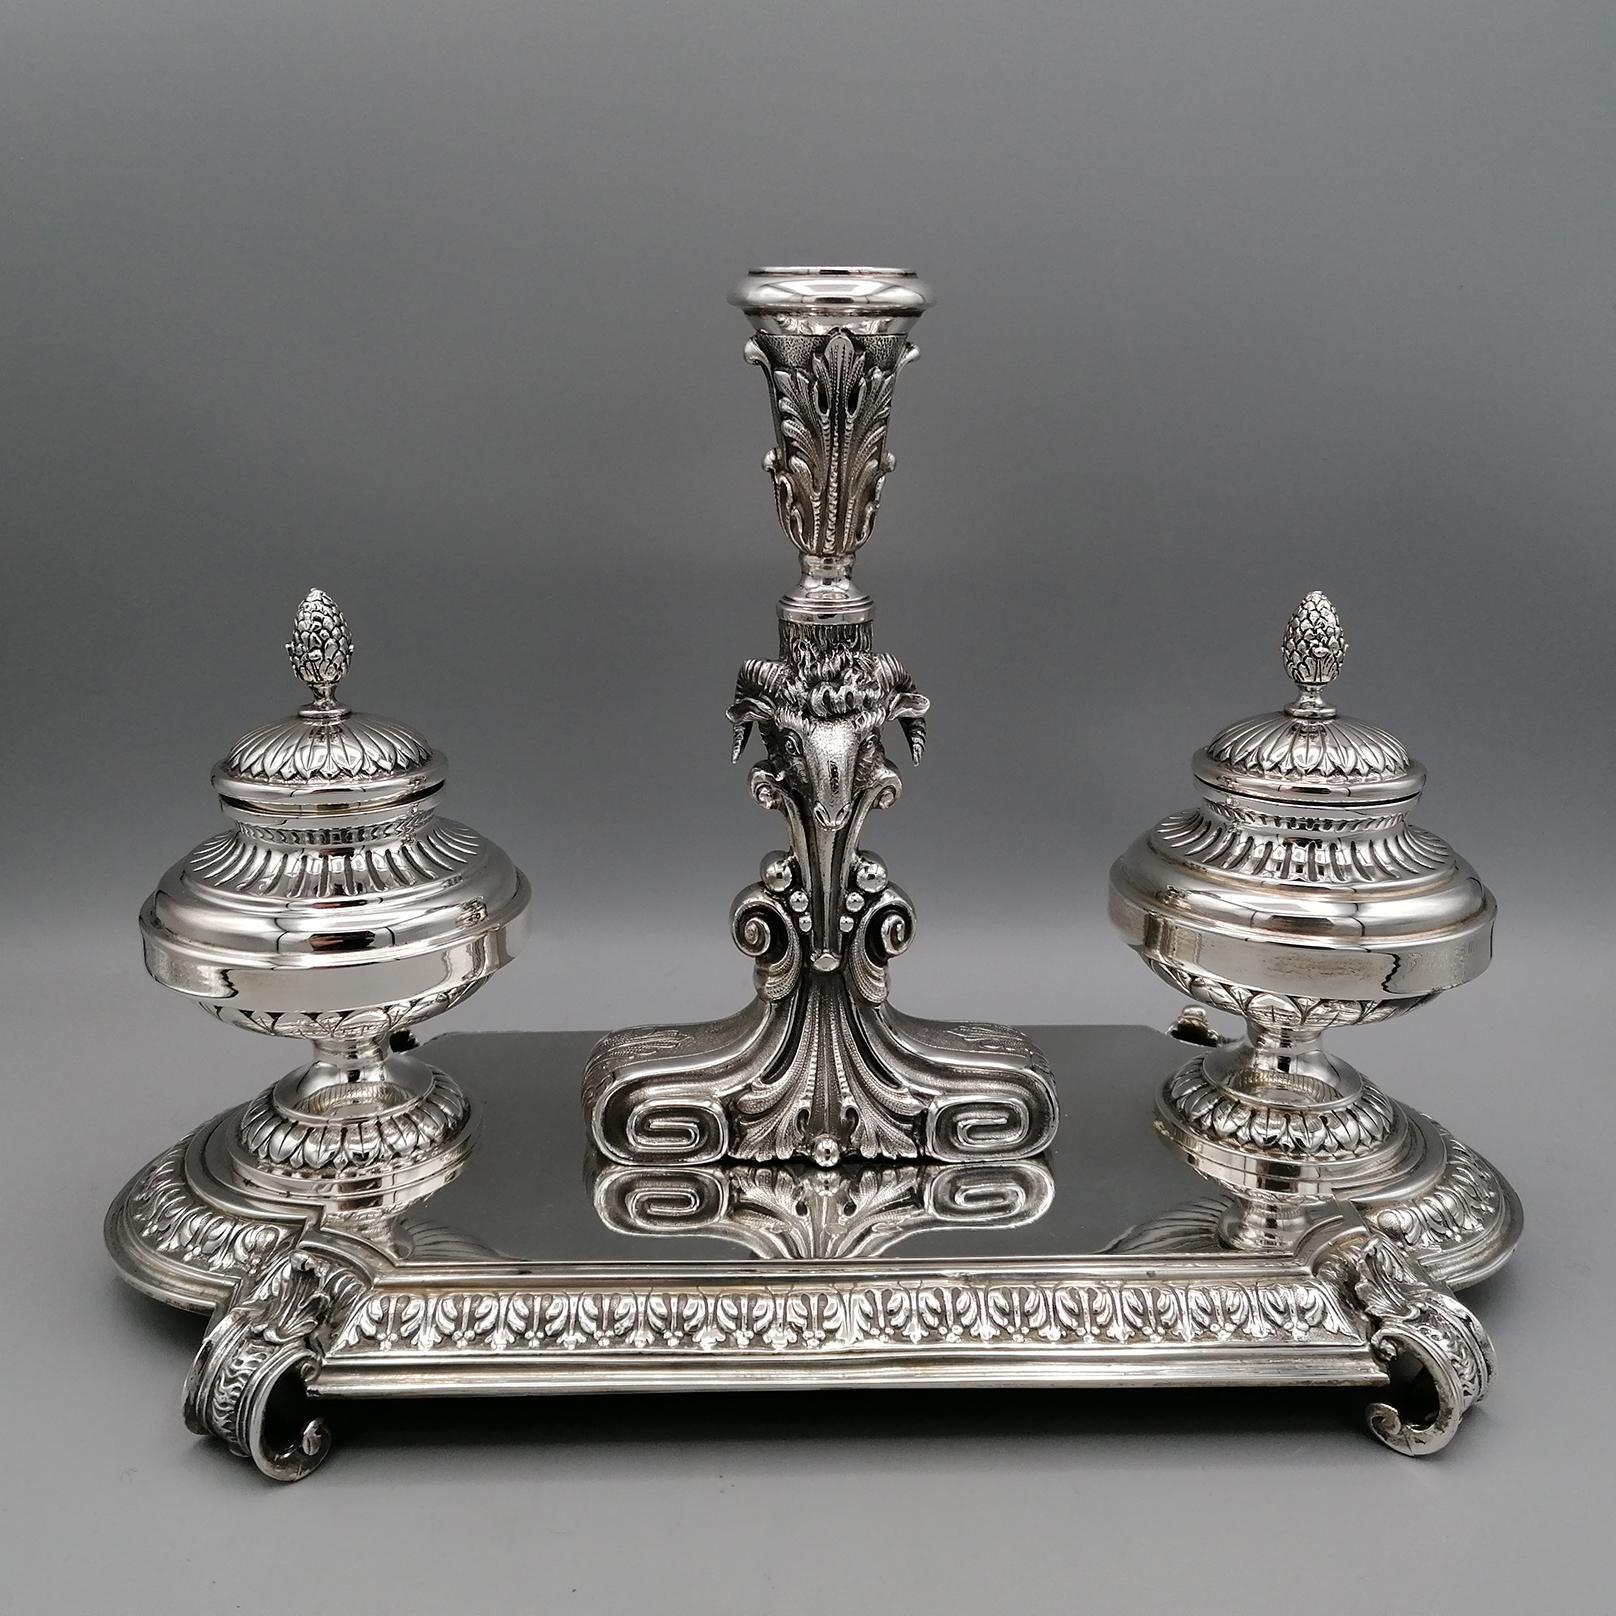 Empire style 800 silver inkstand
The base of the inkstand, completely handmade, is shaped like a 